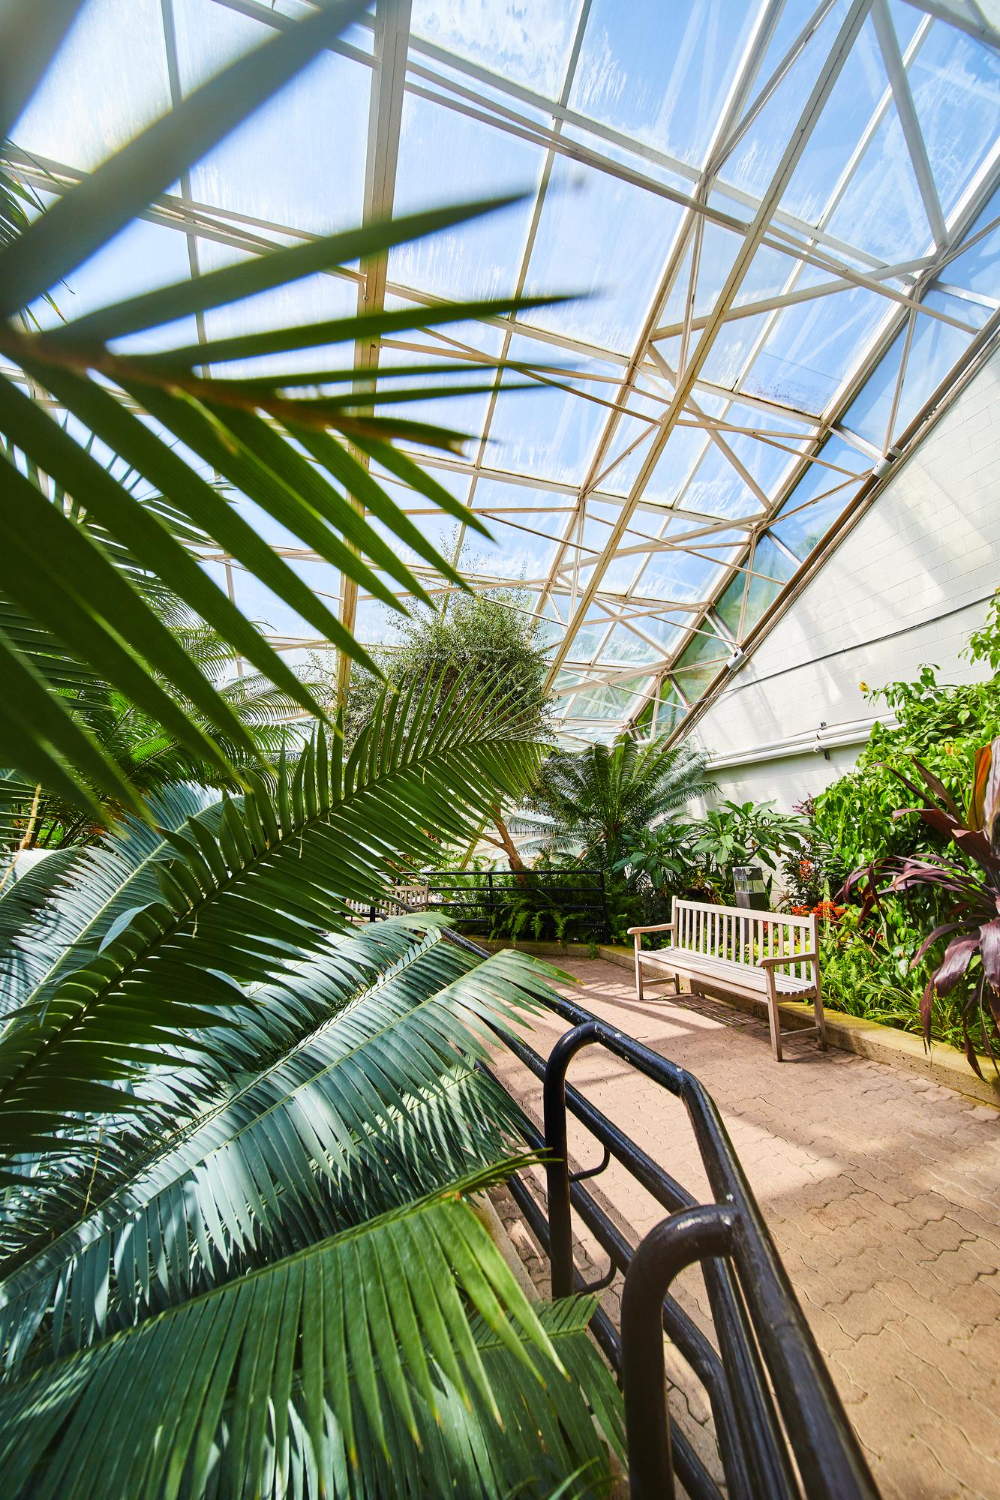 Rainforest greenhouse with bench path and glass roof